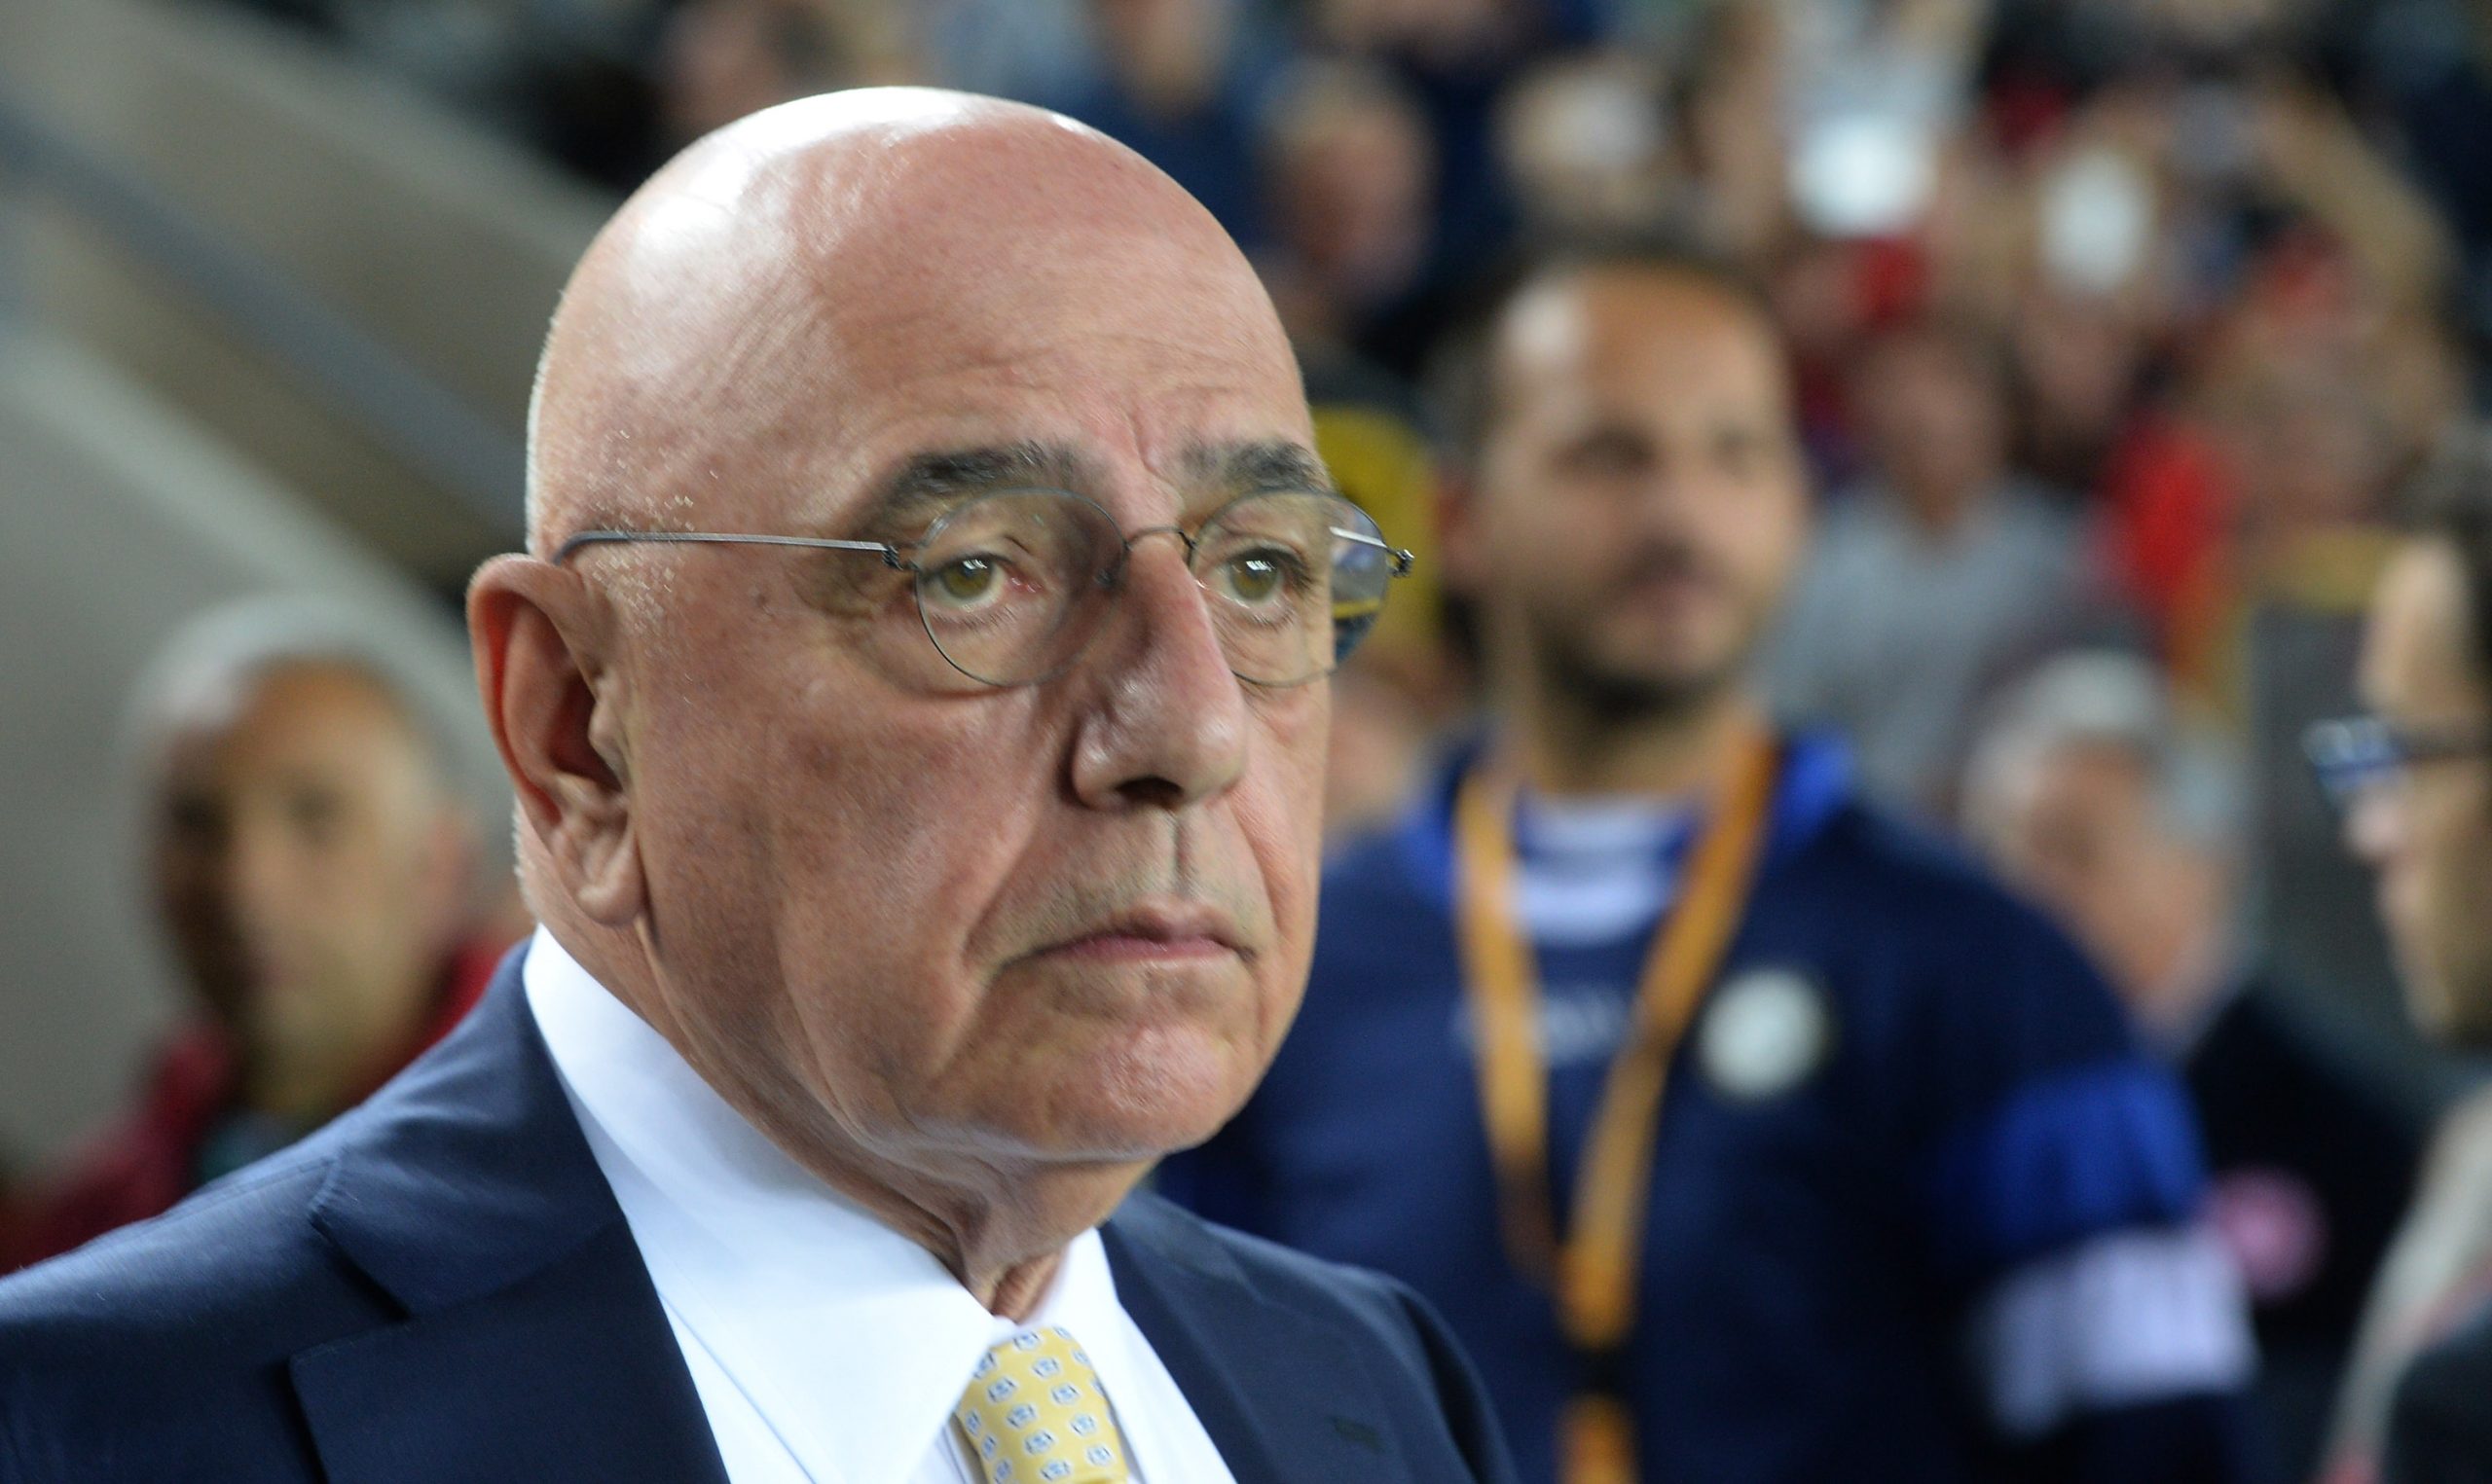 Monza CEO Adriano Galliani: “Top Player We Were Turned Down By Was Paulo Dybala Rather Than Ex-Inter Captain Mauro Icardi”